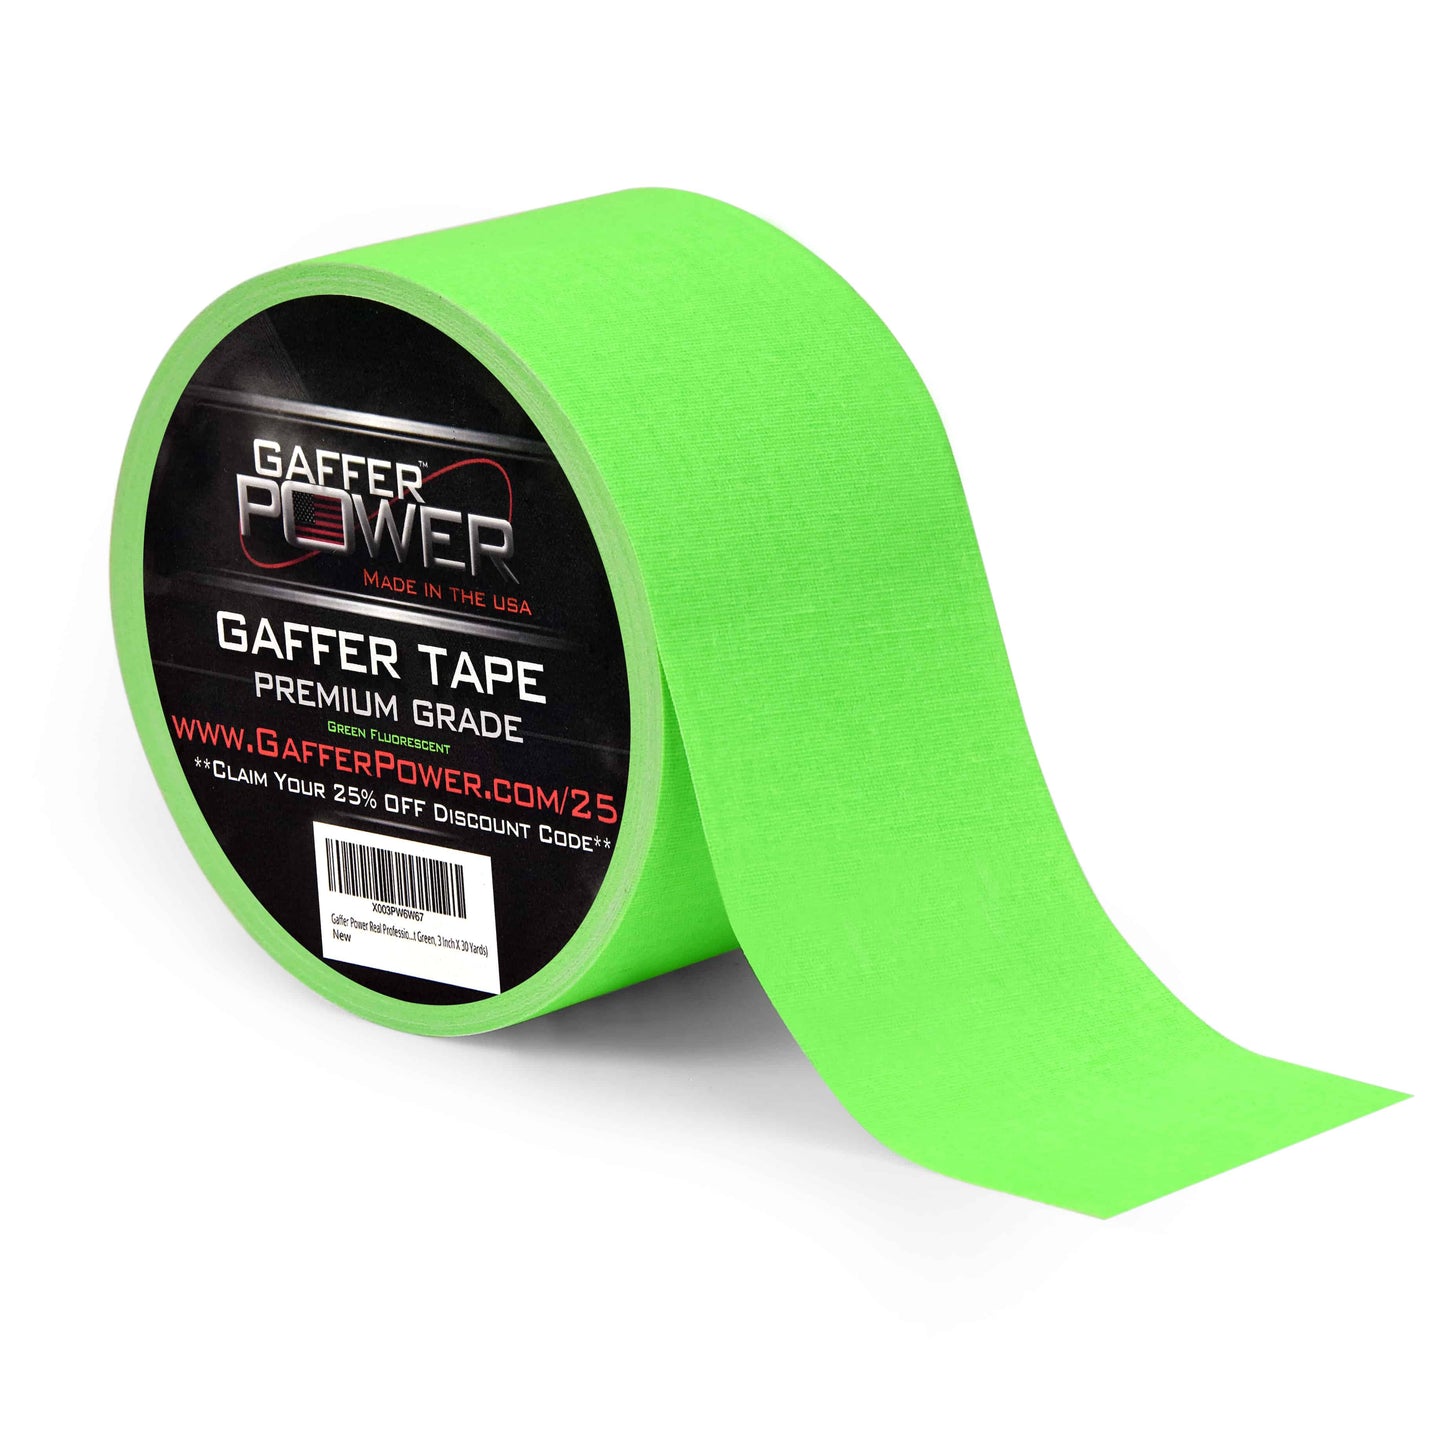 Real Professional Premium Grade Gaffer Tape Made in The USA - Heavy Duty Gaffers Tape - Non-Reflective - Multipurpose - Fluorescent Green, 3 Inch X 30 Yards